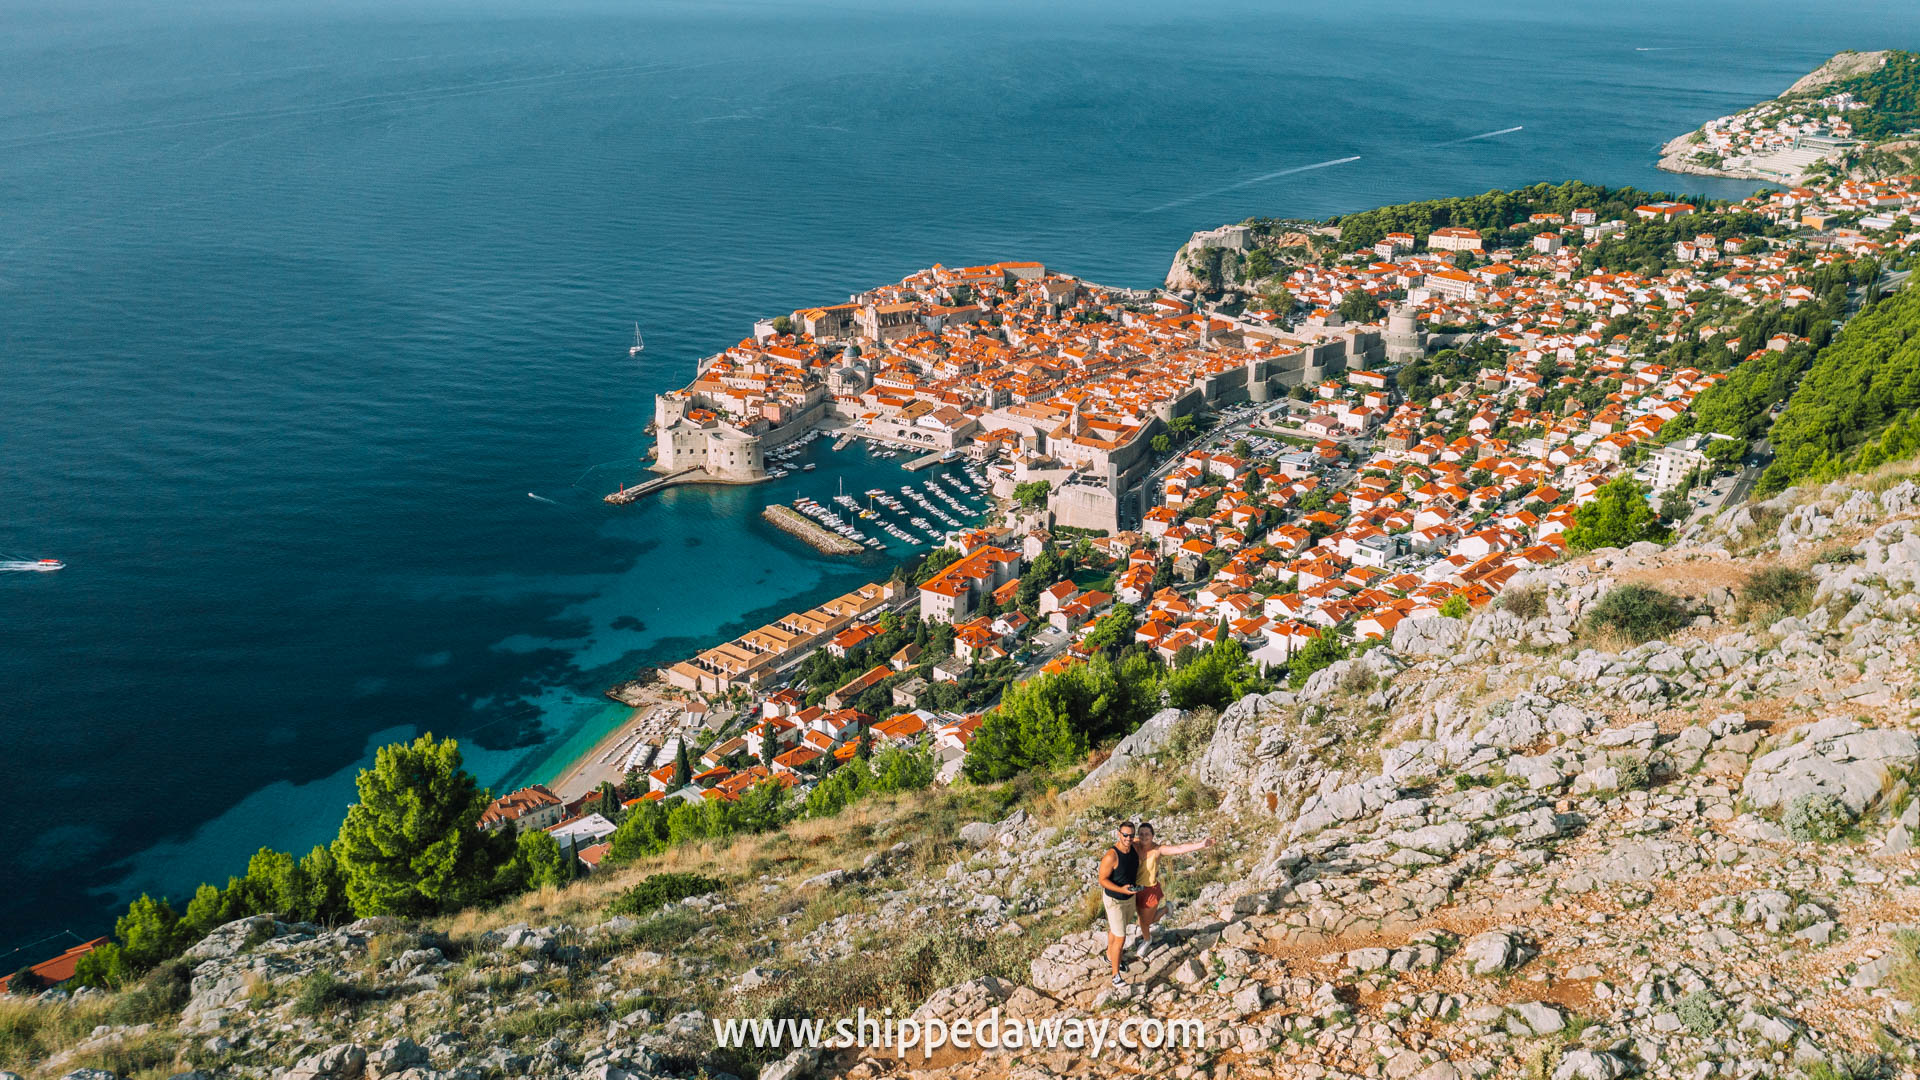 mount srđ dubrovnik, top things to do in dubrovnik, dubrovnik cable car, hiking dubrovnik, dubrovnik travel guide, dubrovnik old town, dubrovnik croatia, dubrovnik attractions